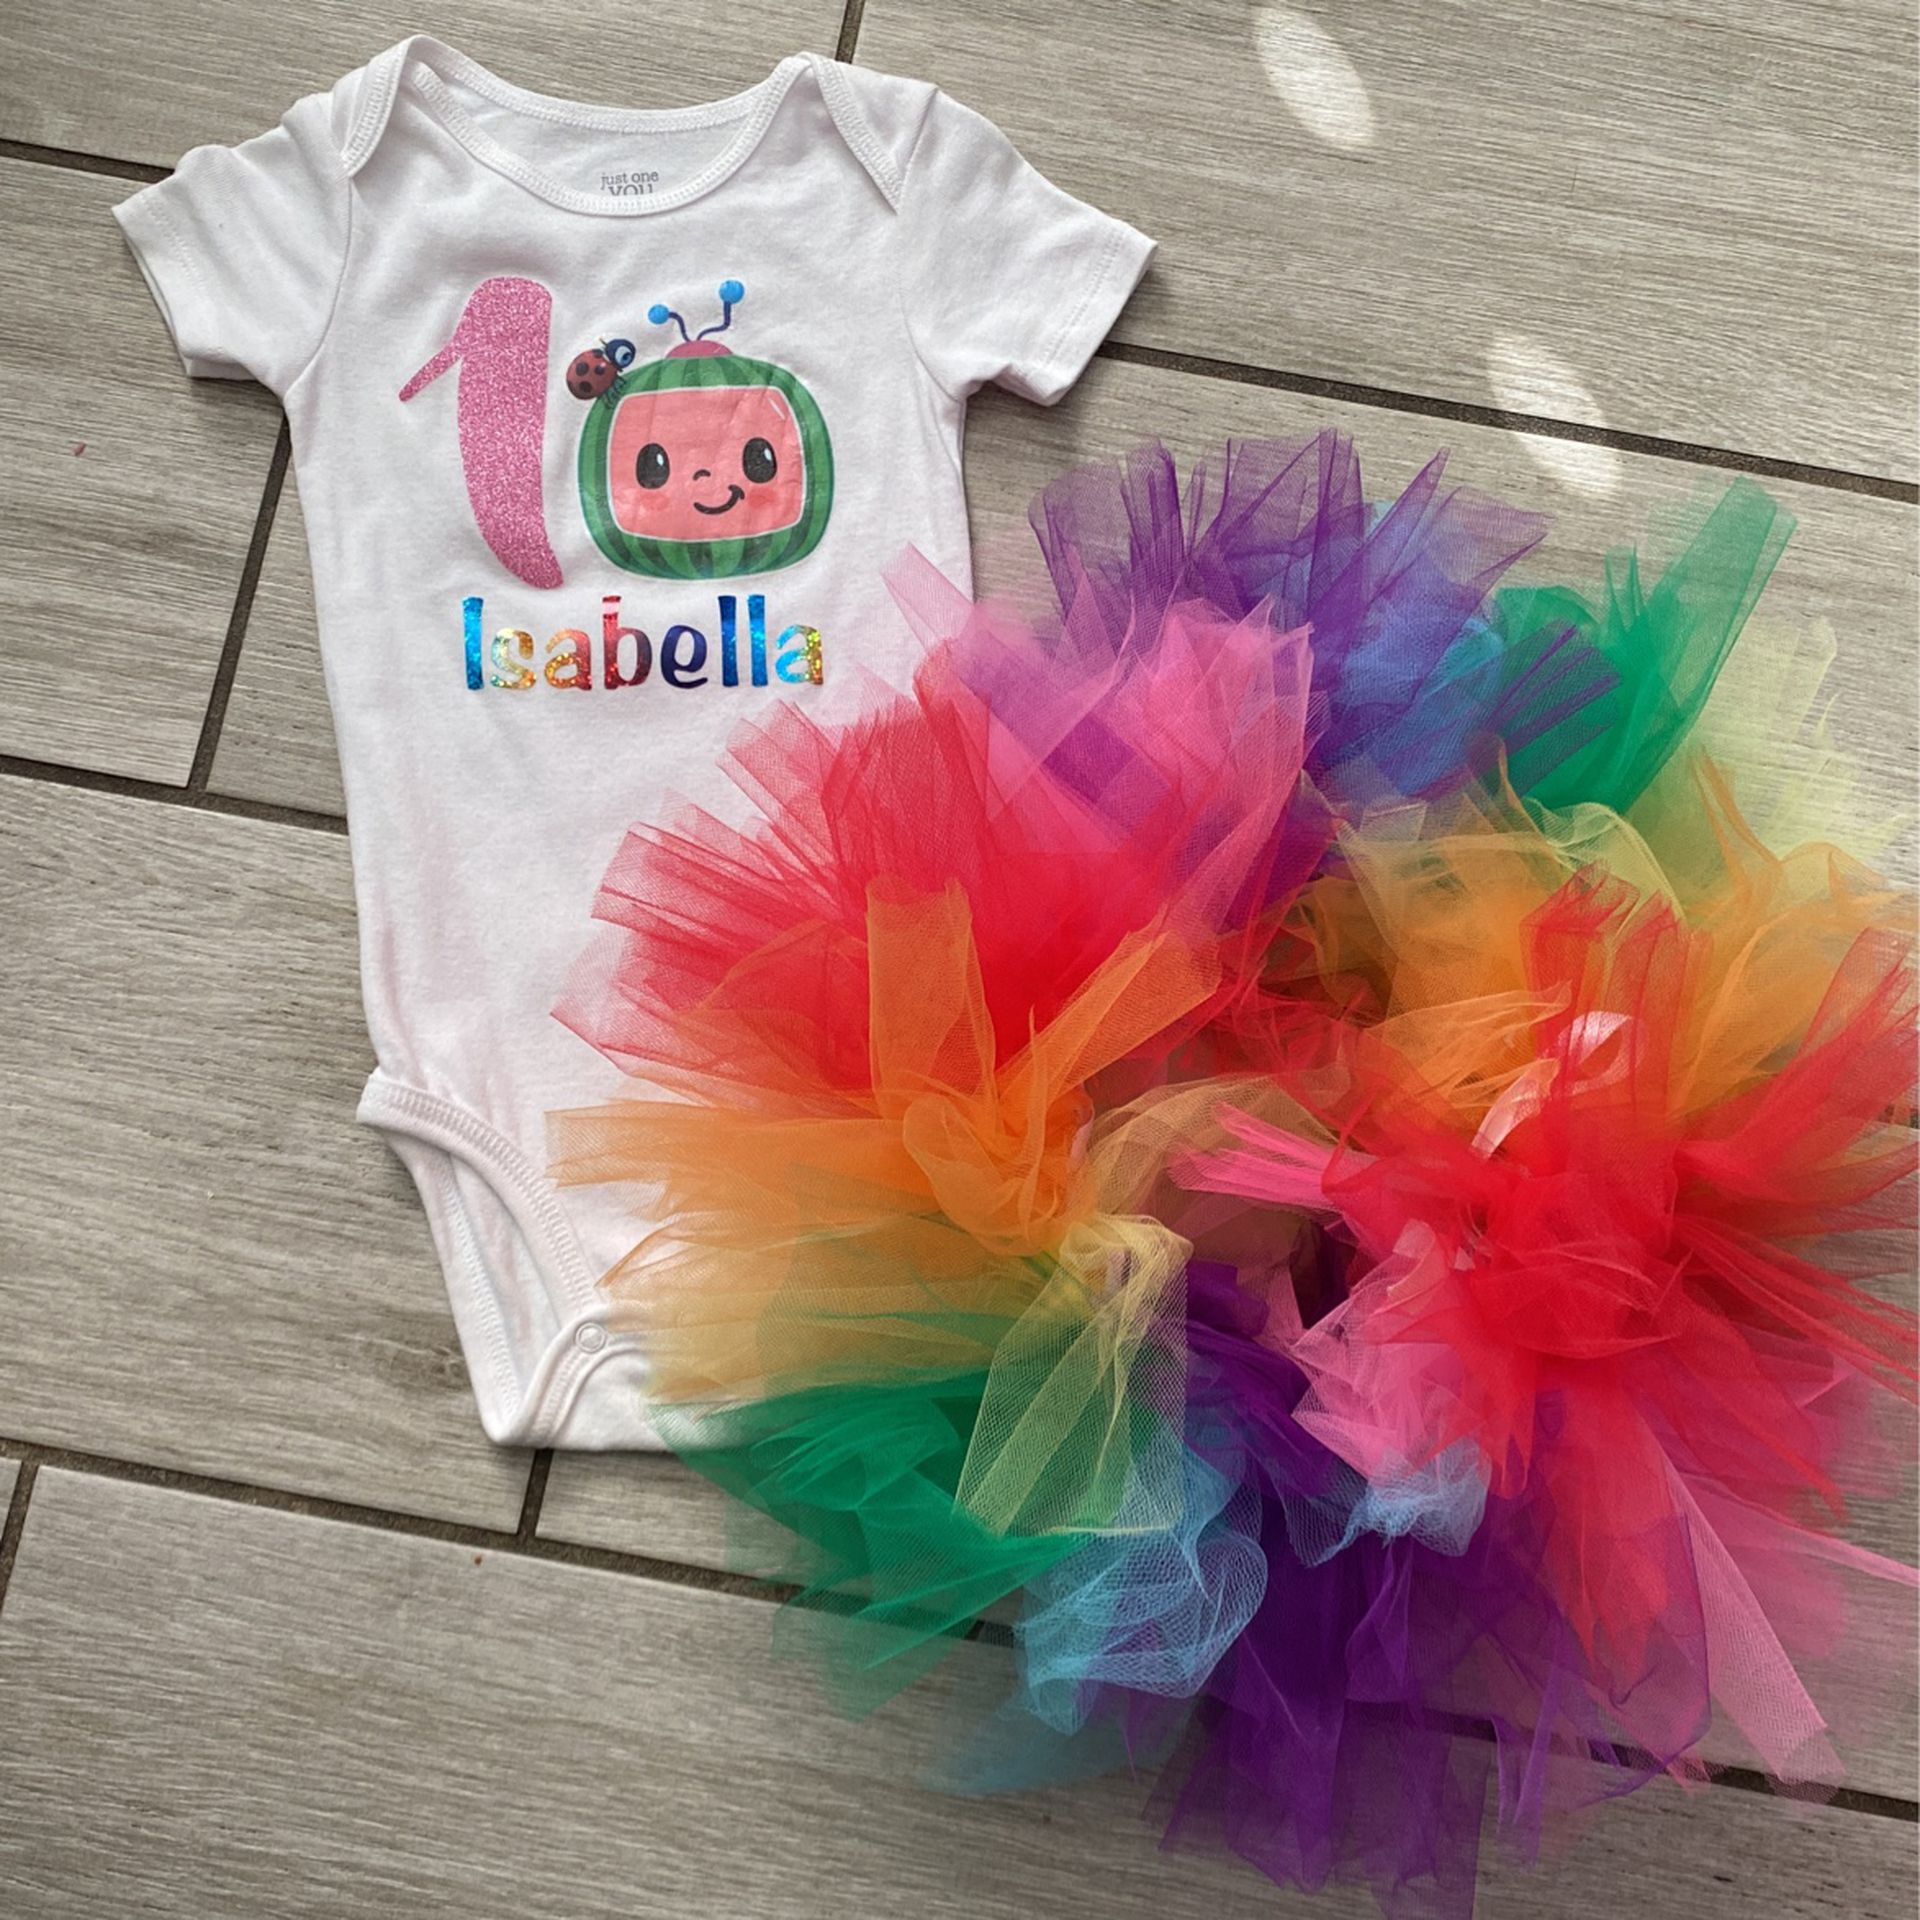 18 months Cocomelon Rainbow Tutu Outfit